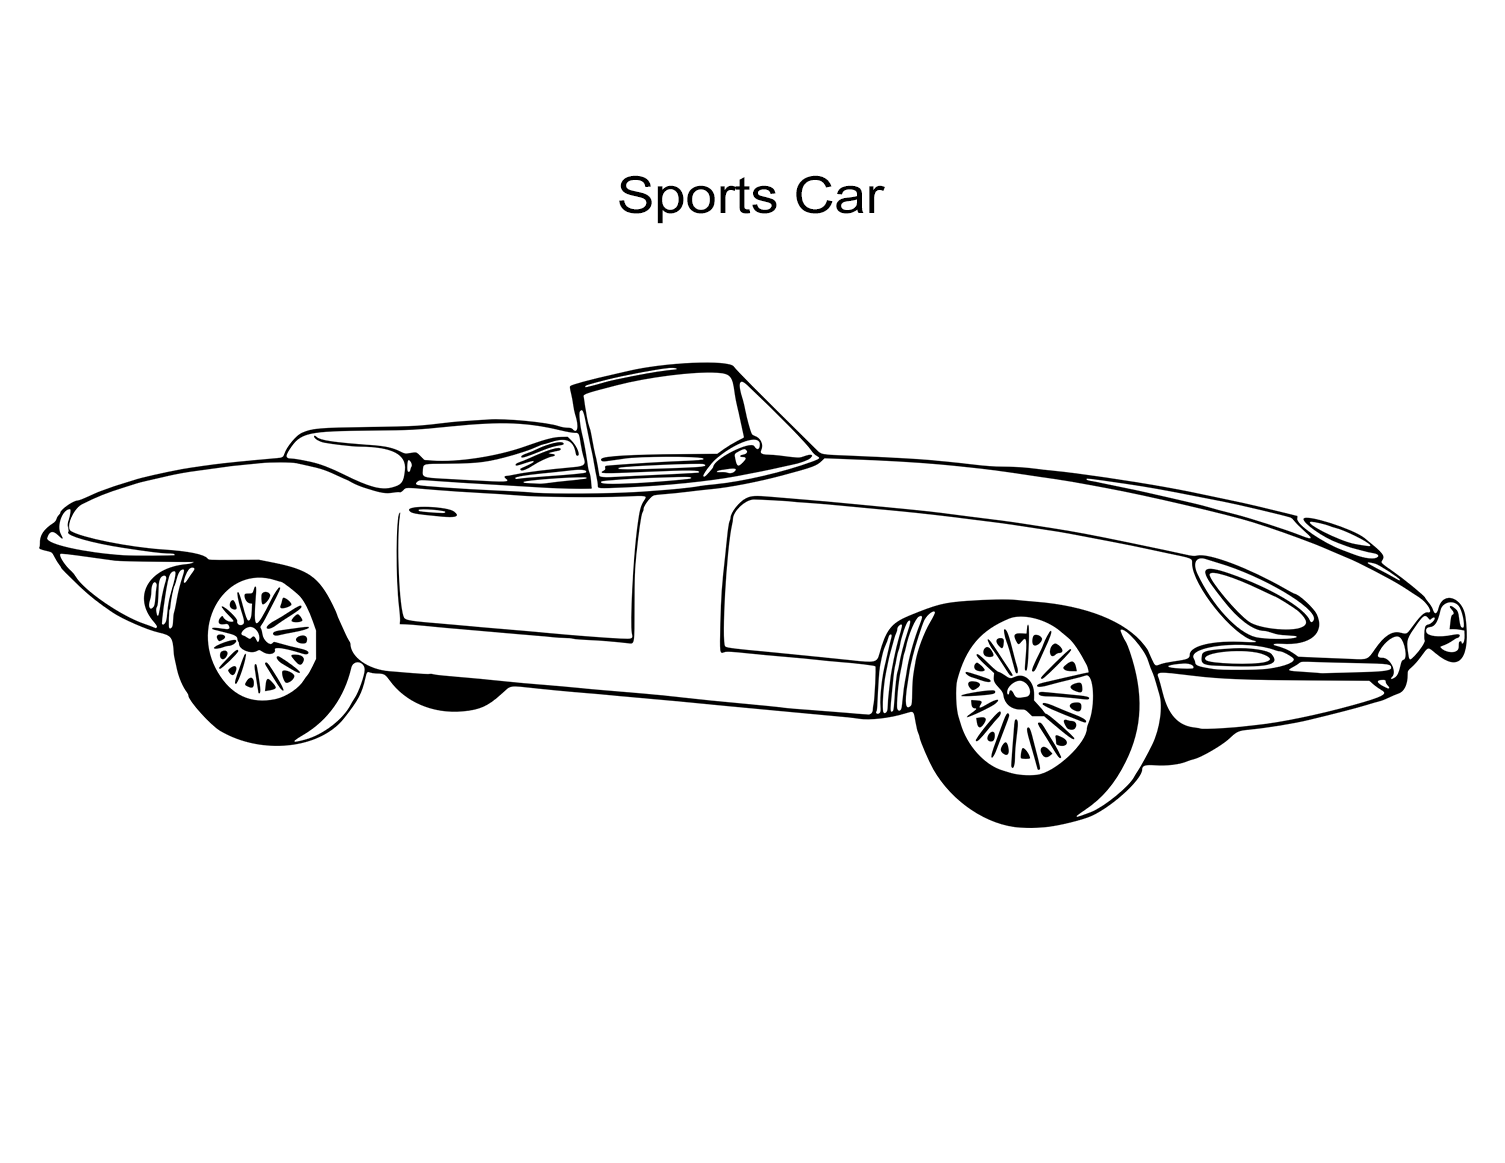 10-car-coloring-sheets-sports-muscle-racing-cars-and-more-all-esl